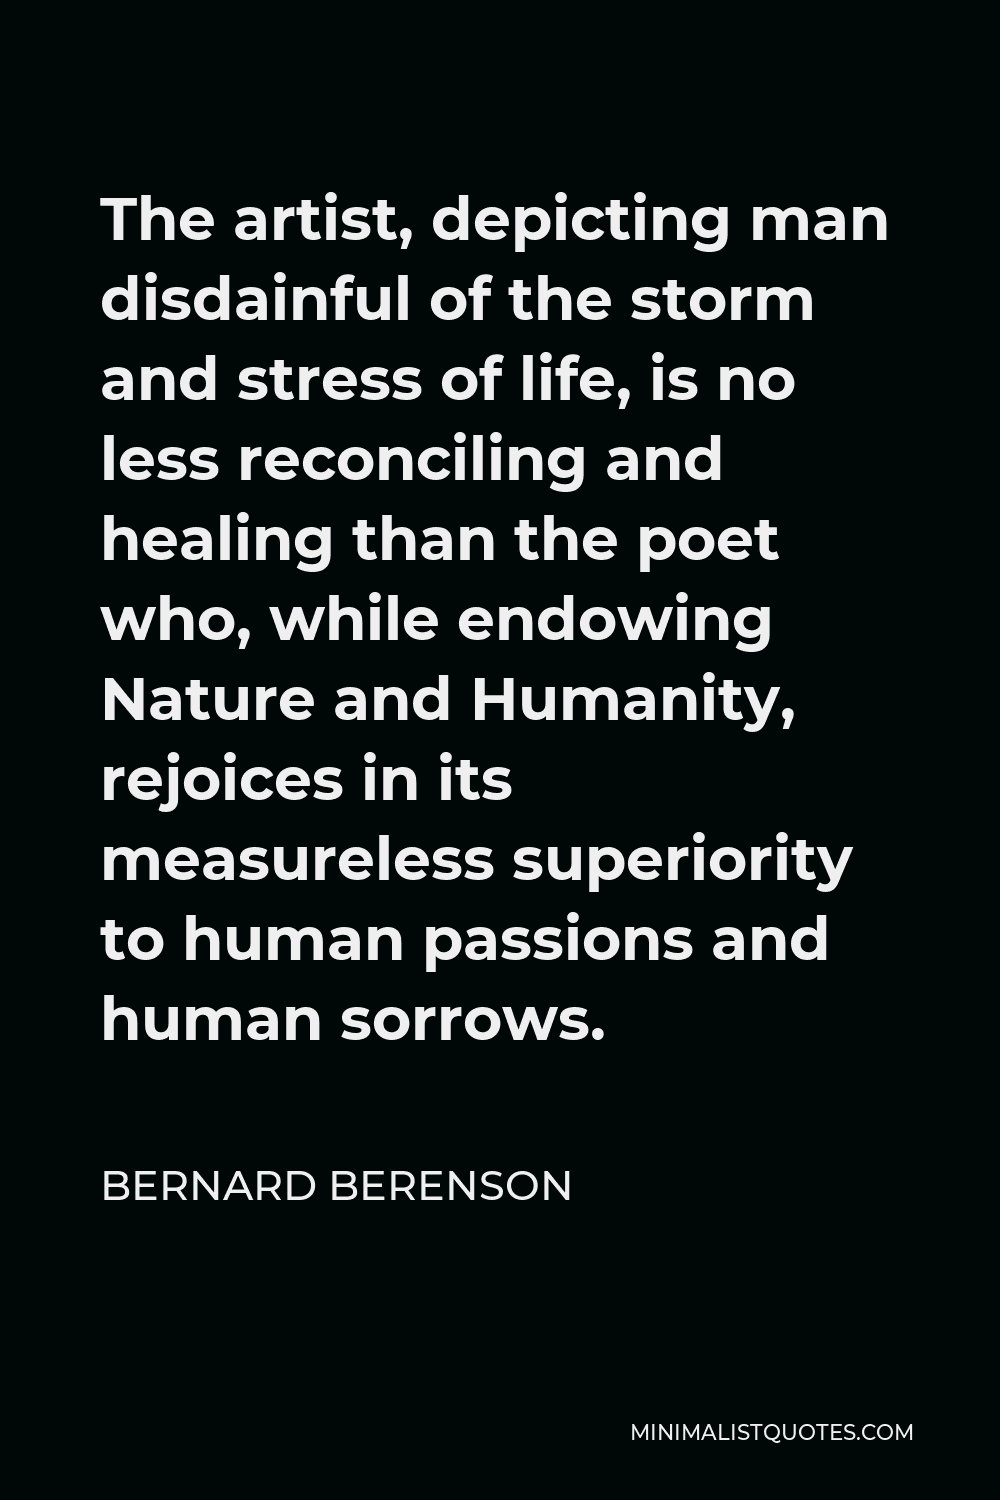 Bernard Berenson Quote - The artist, depicting man disdainful of the storm and stress of life, is no less reconciling and healing than the poet who, while endowing Nature and Humanity, rejoices in its measureless superiority to human passions and human sorrows.